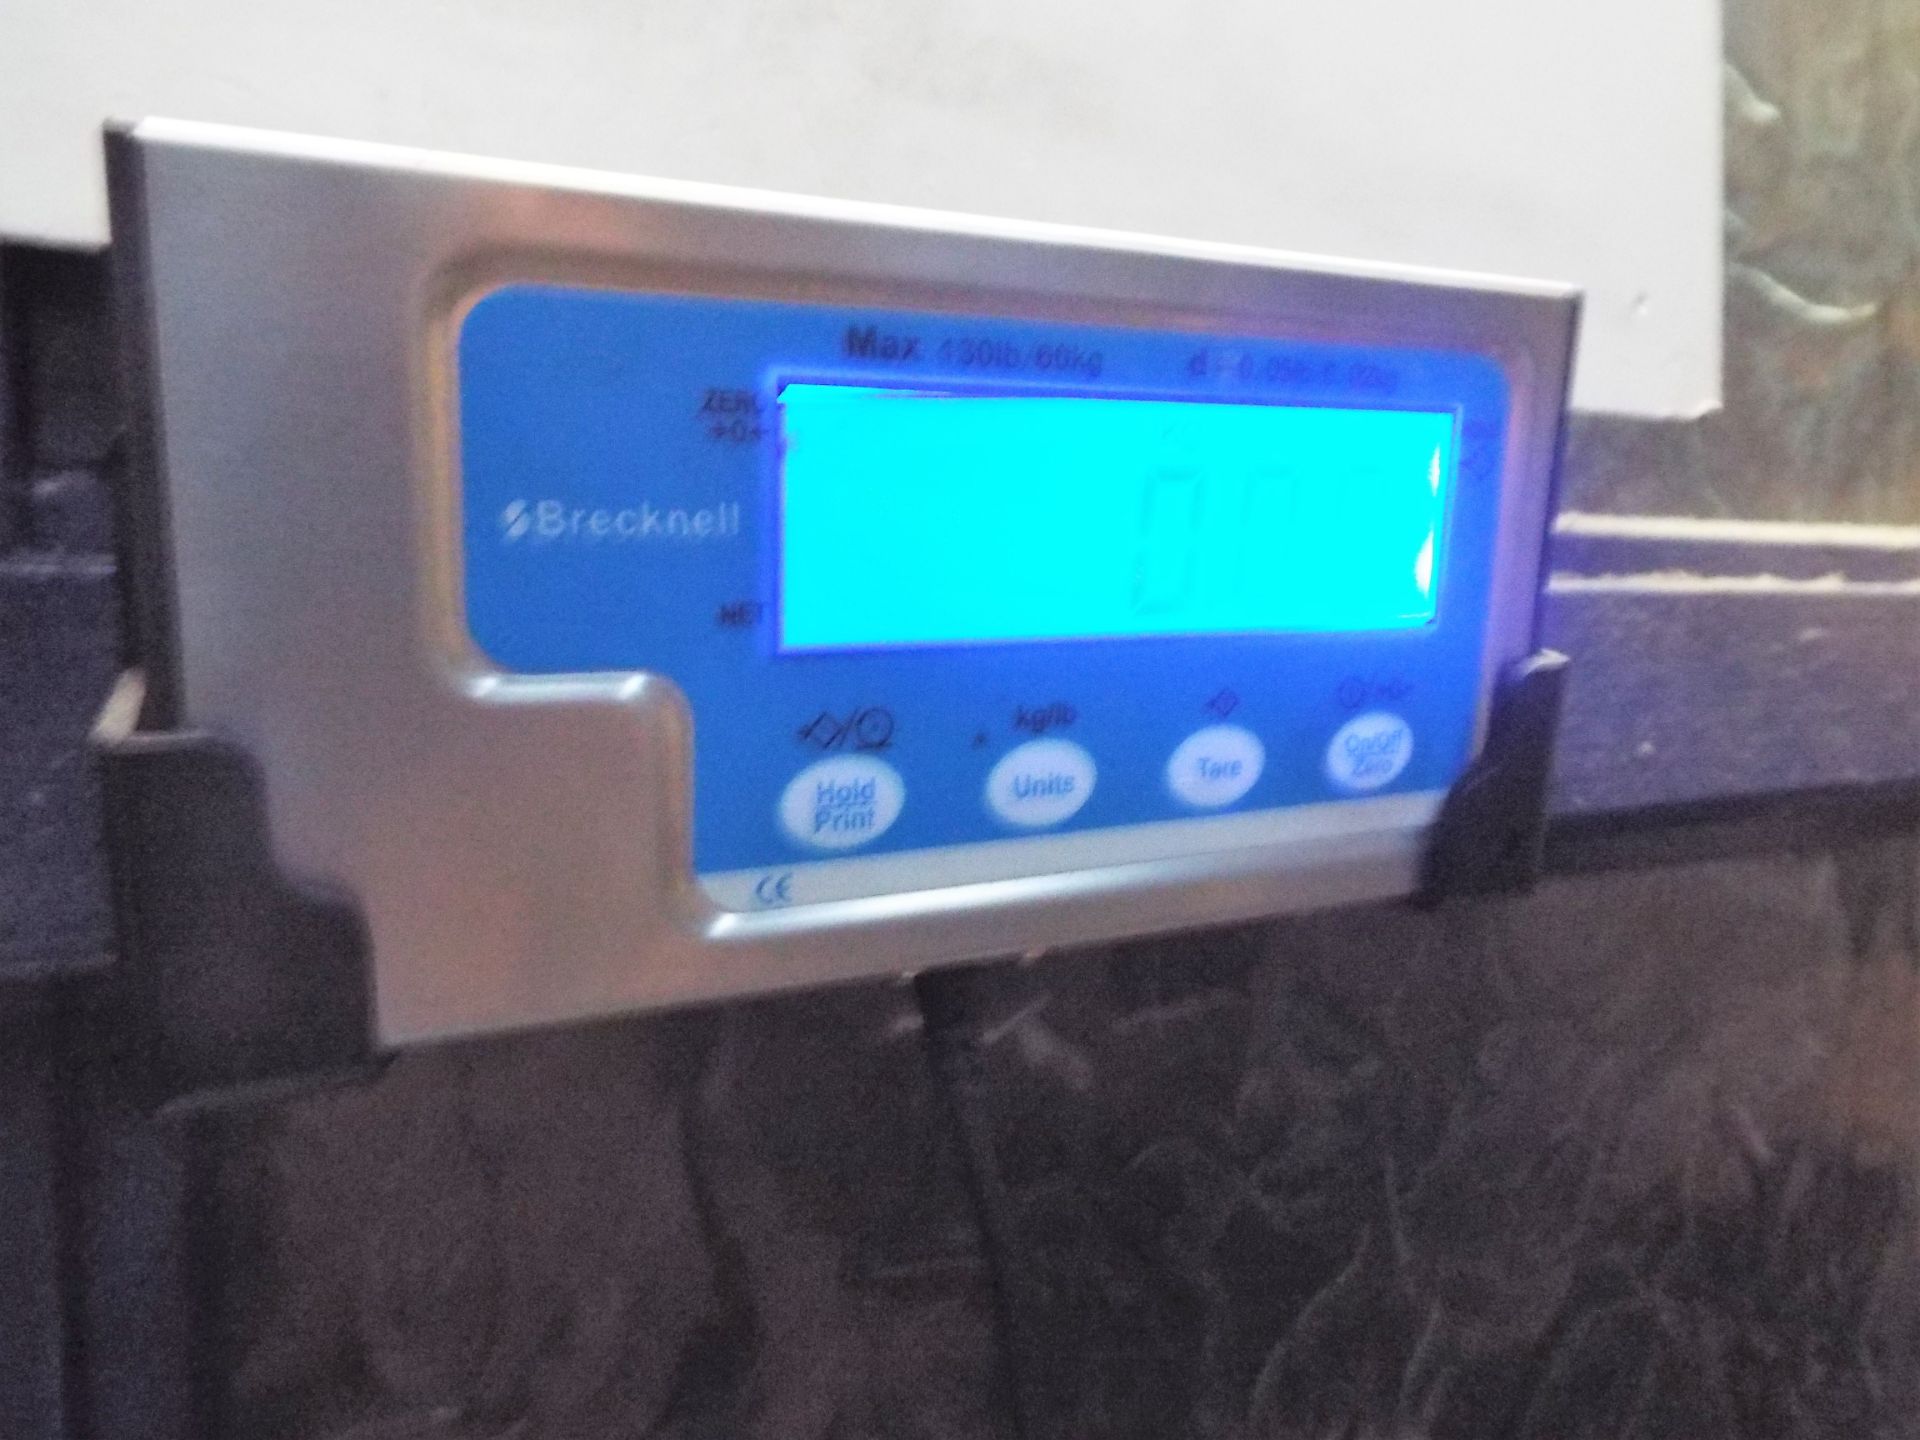 Bracknell Precision Weighing Scale